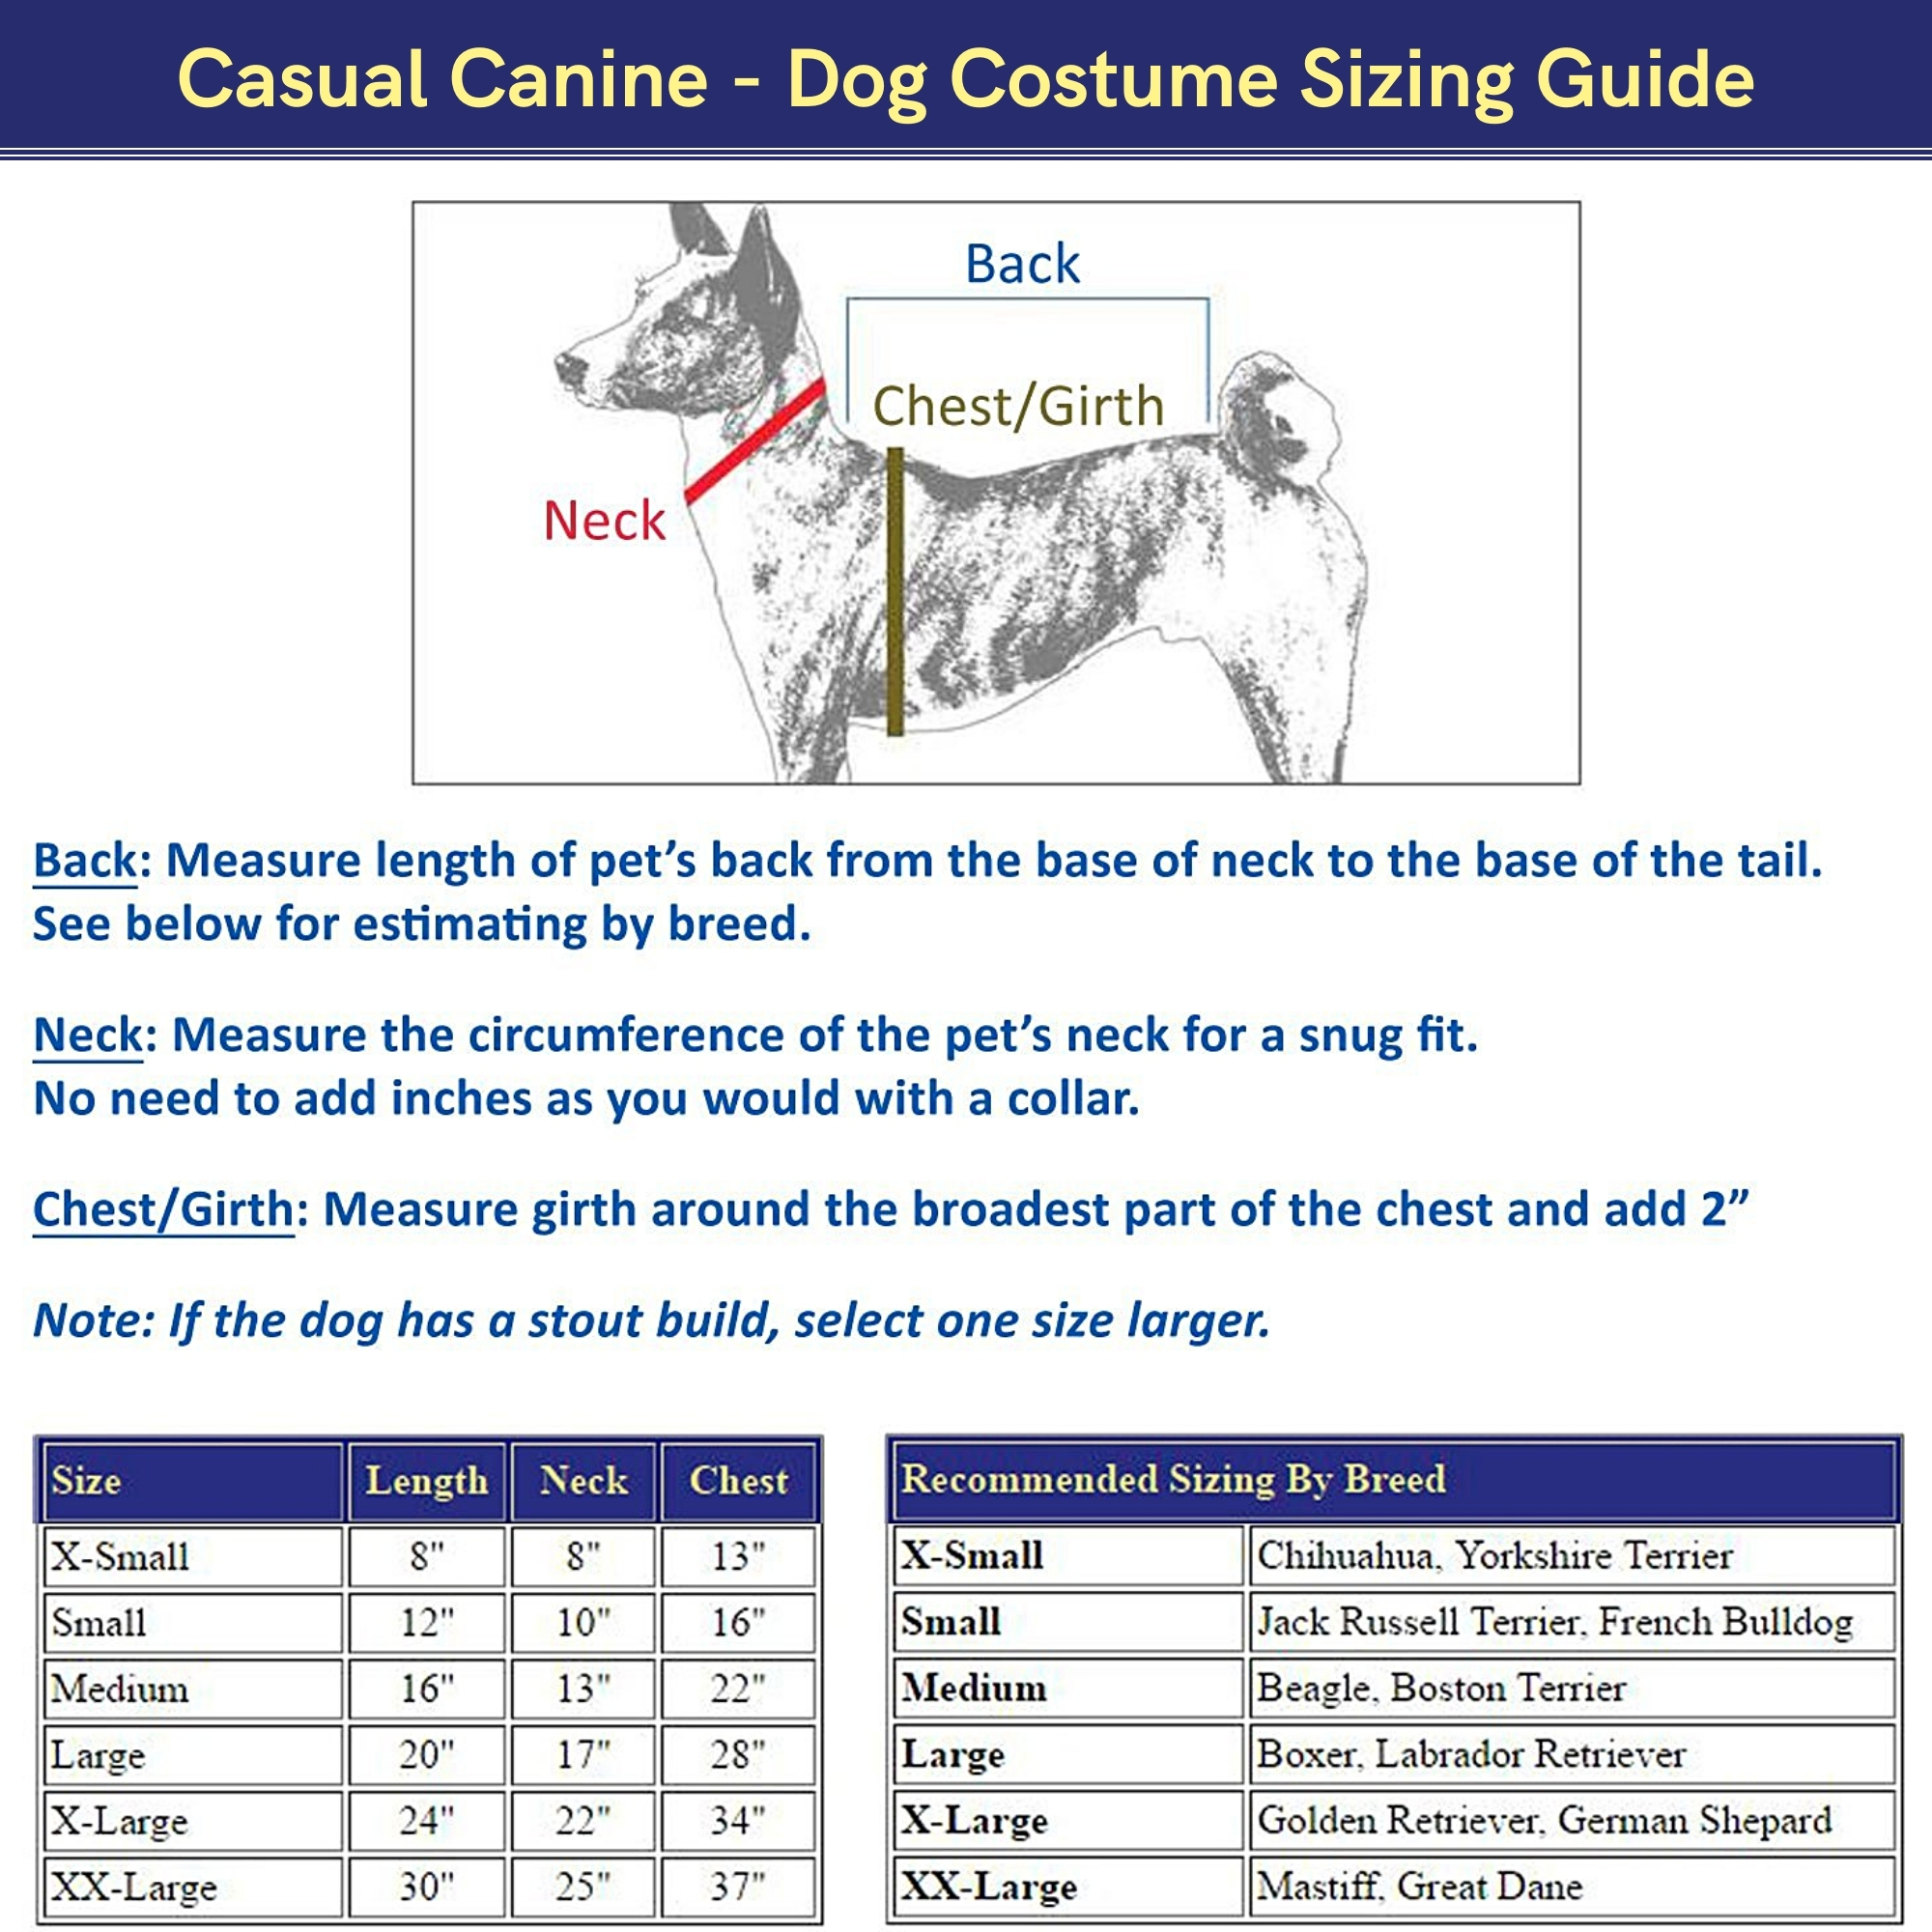 Casual Canine Hot Diggity Dog with Mustard Costume for Dogs, 14" Small/Medium - image 3 of 3